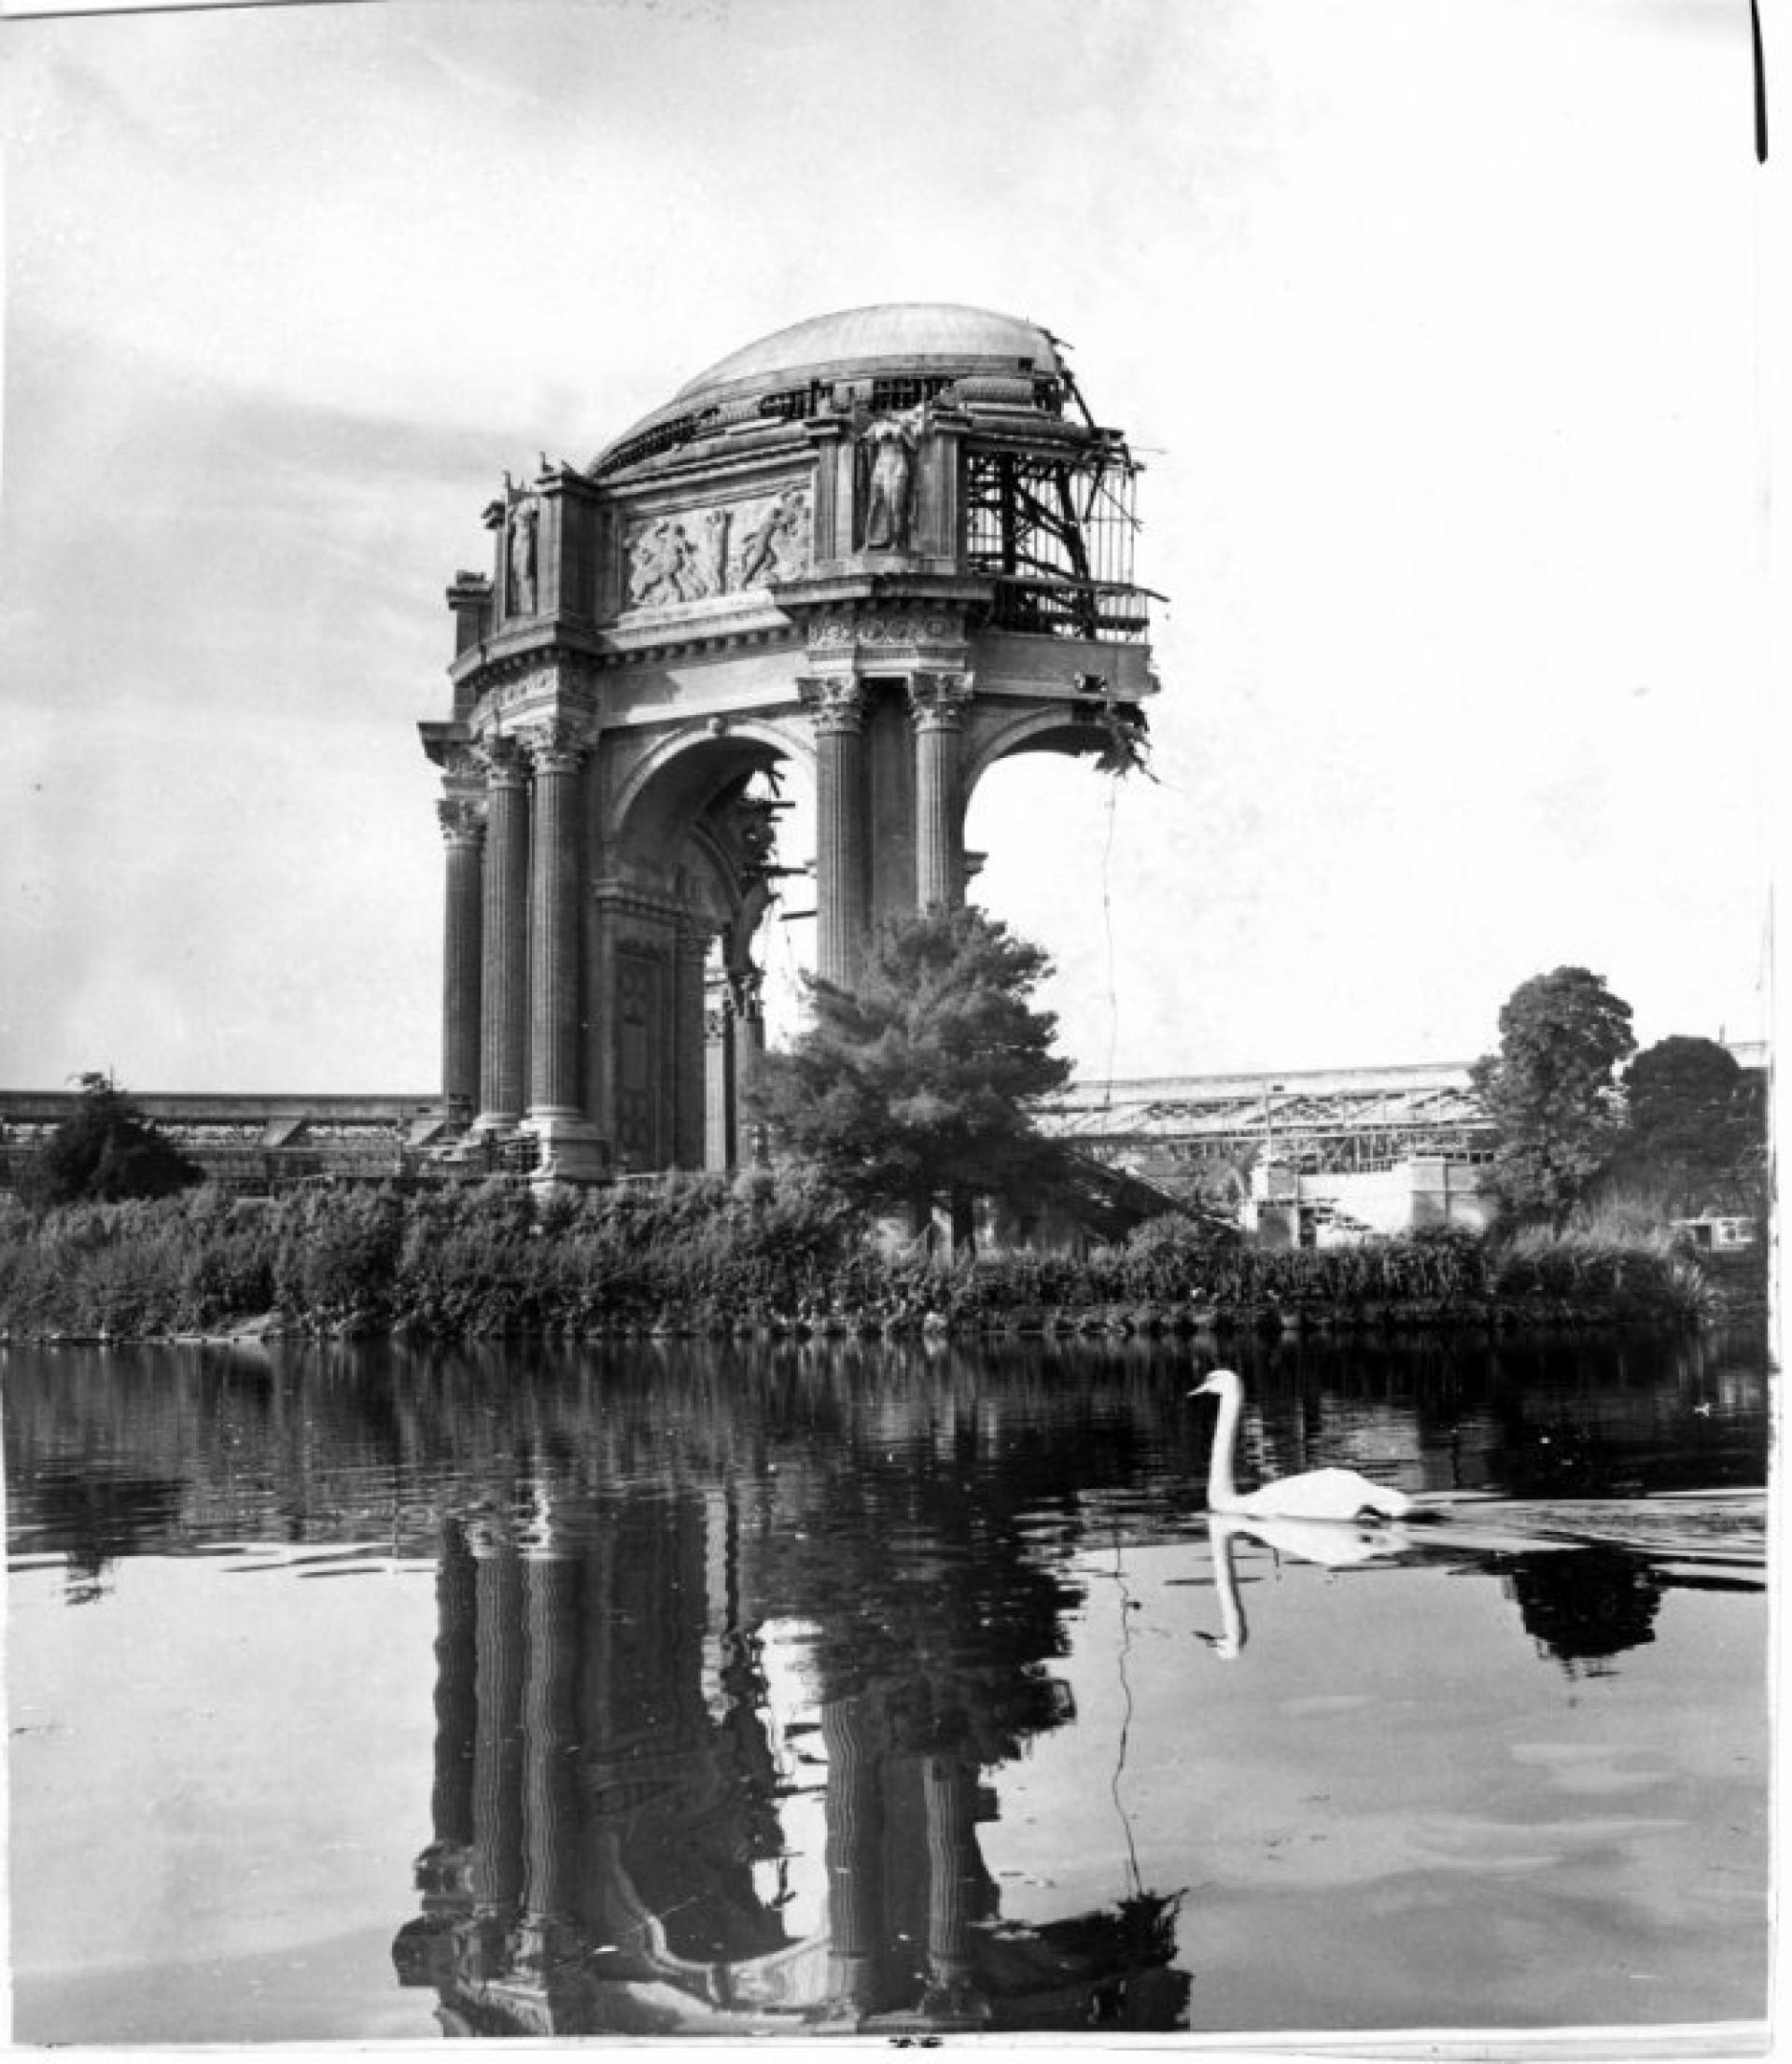 The Palace of Fine Arts of the Panama - Pacific International Exposition-PPIE by Bernard Maybeck, San Francisco, 1915 (partial demolition and reconstruction with durable materials in 1964) | Photo © Gordon Peters